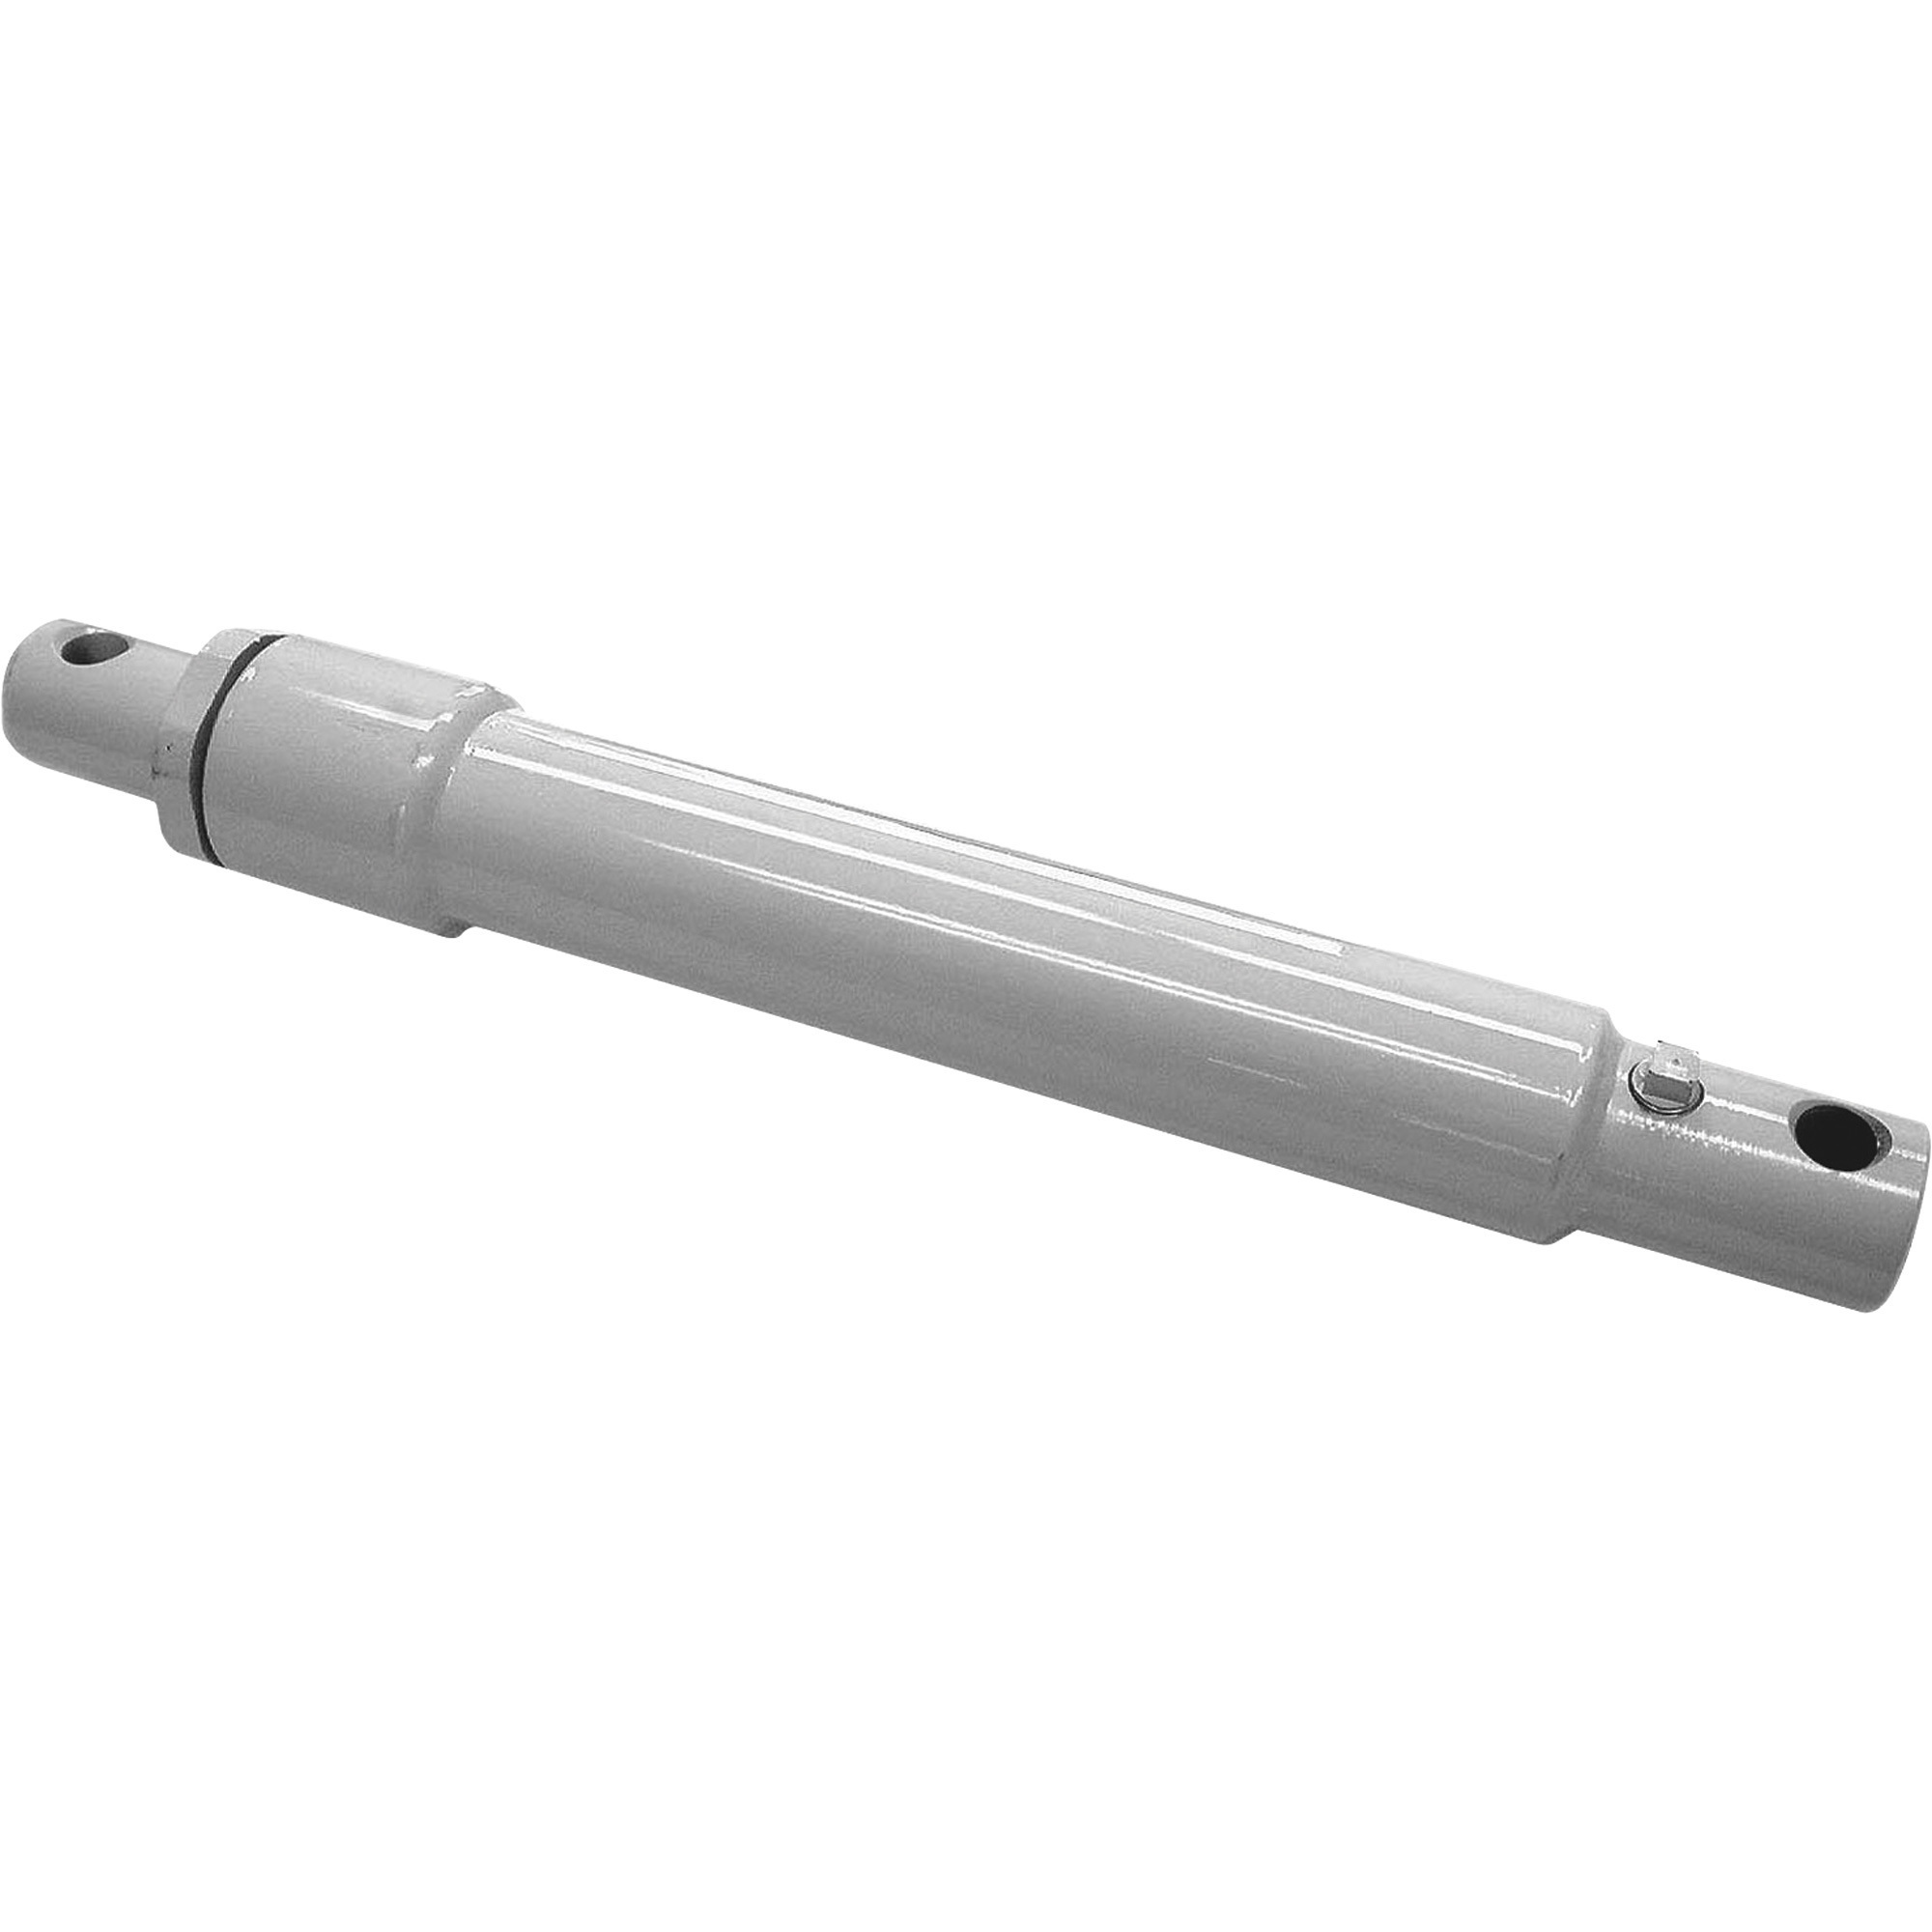 SAM Single Acting Hydraulic Cylinders for Western Snow Plows, Replaces OEM Part# 56538K, Model 1304201